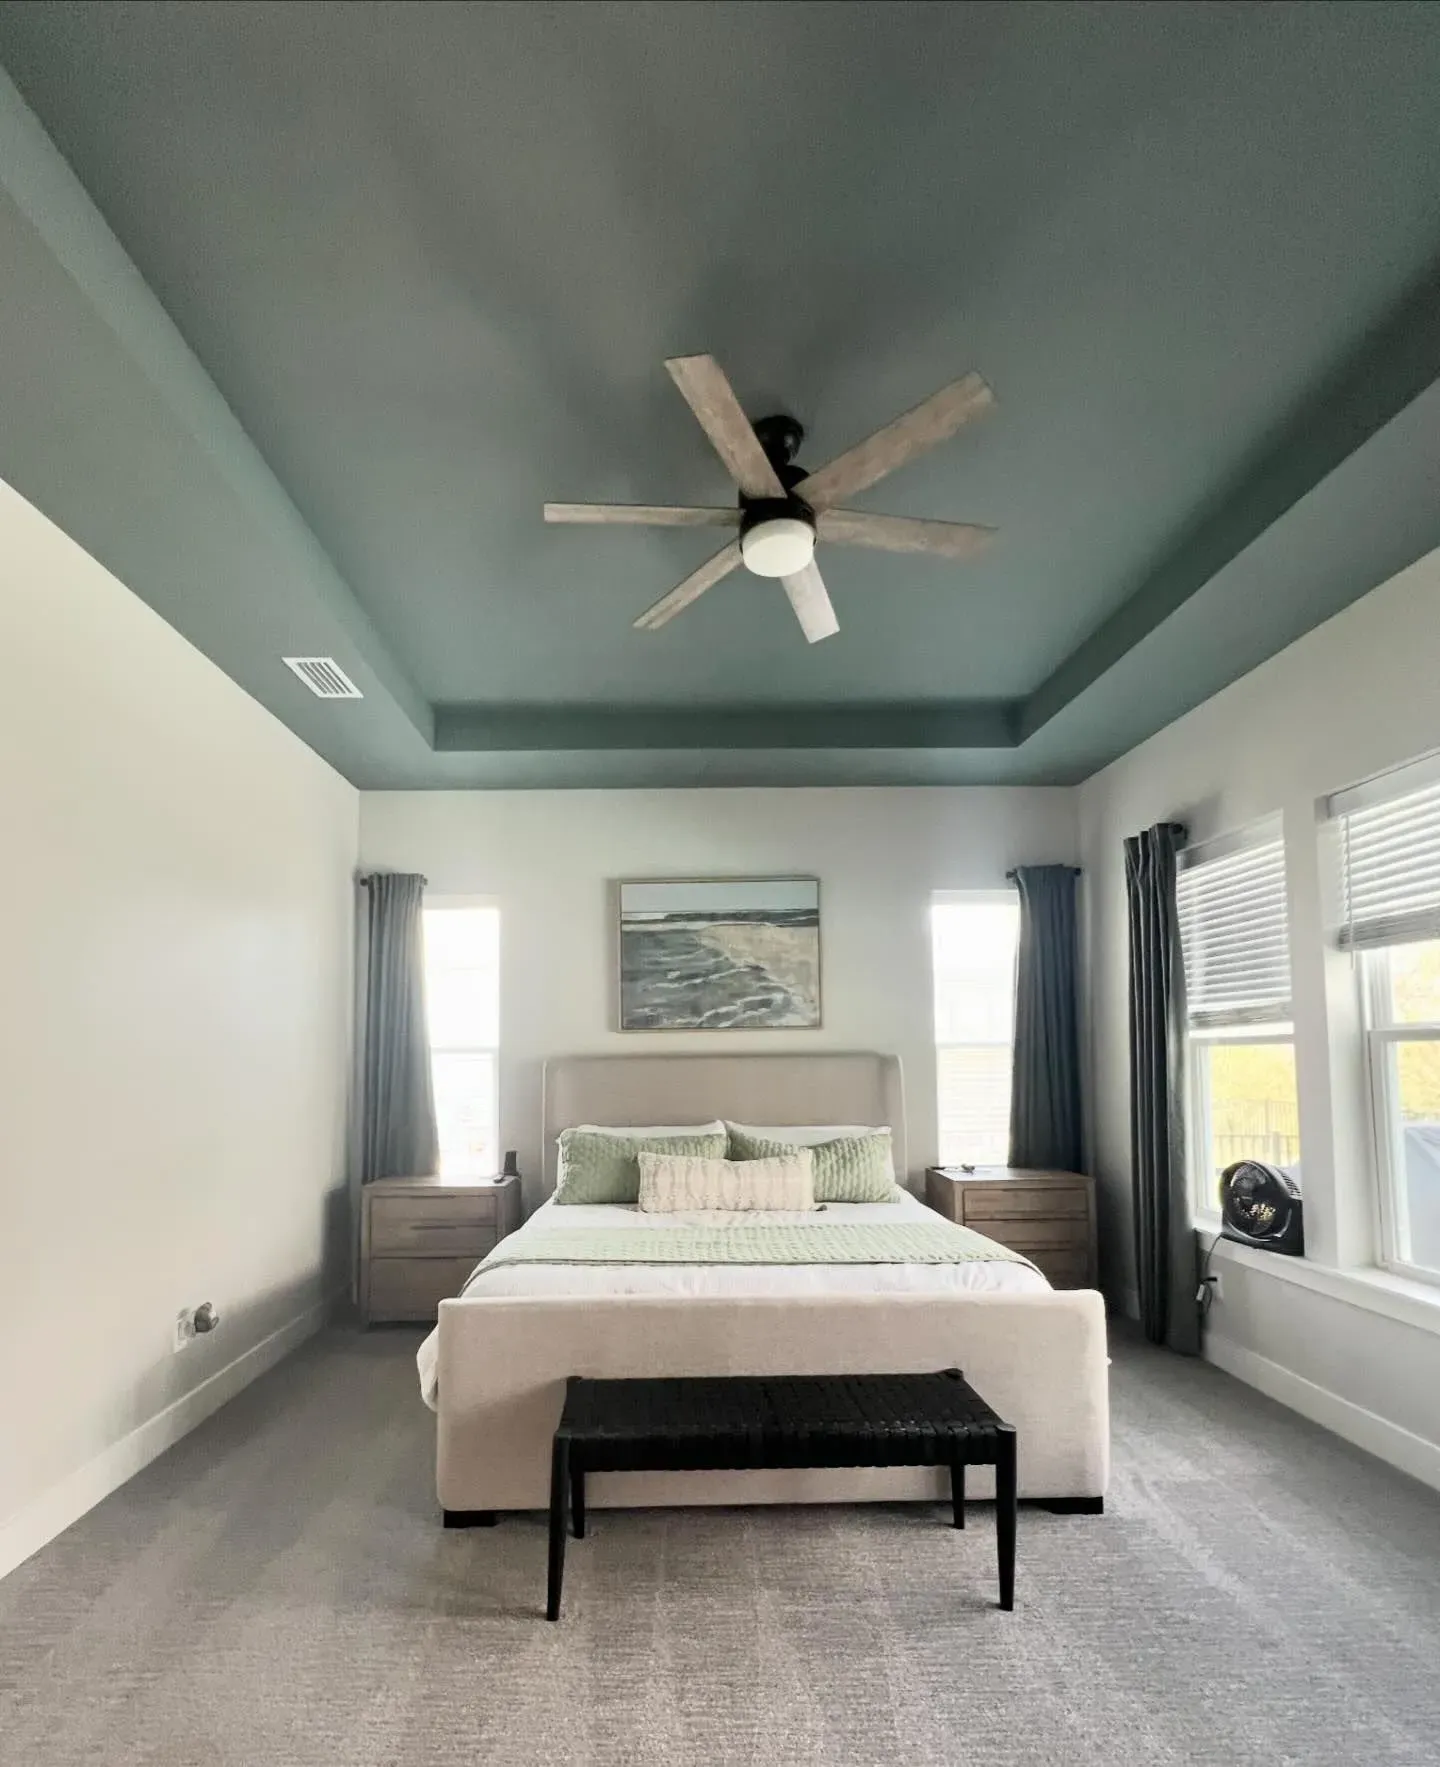 Sherwin Williams Portsmouth bedroom ceiling